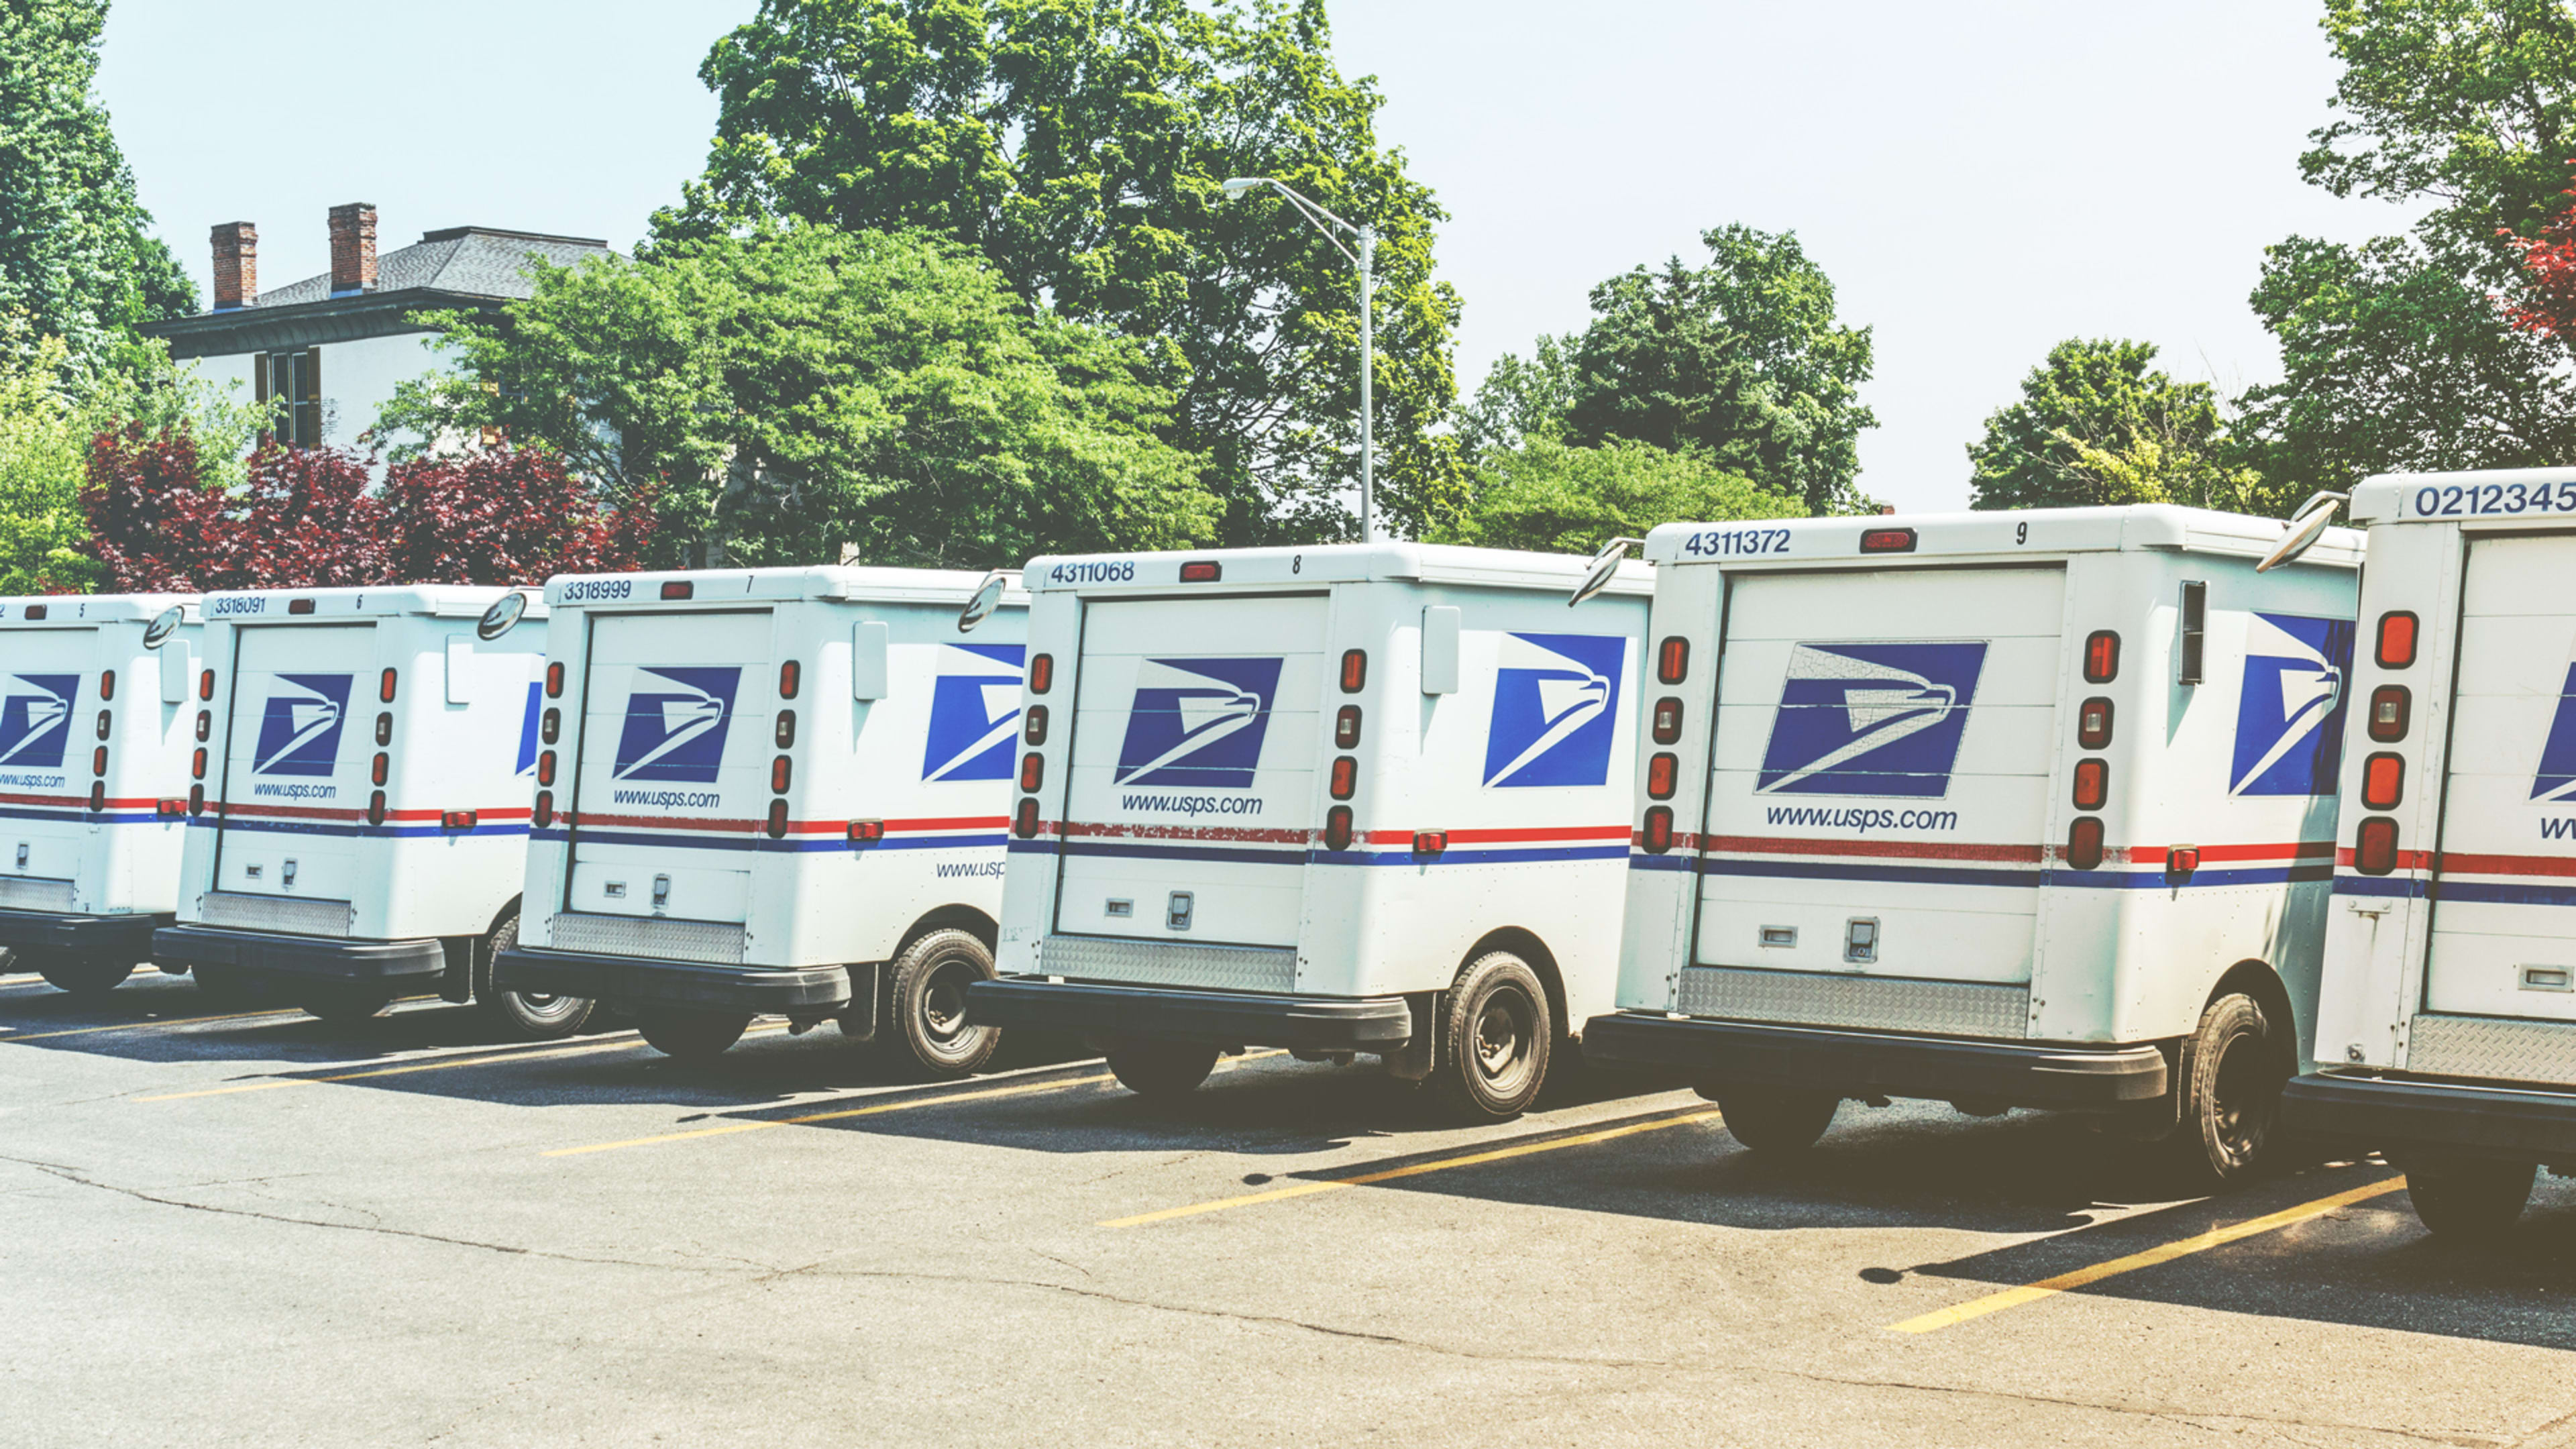 3 business lessons from the surprisingly tech-savvy U.S. Postal Service